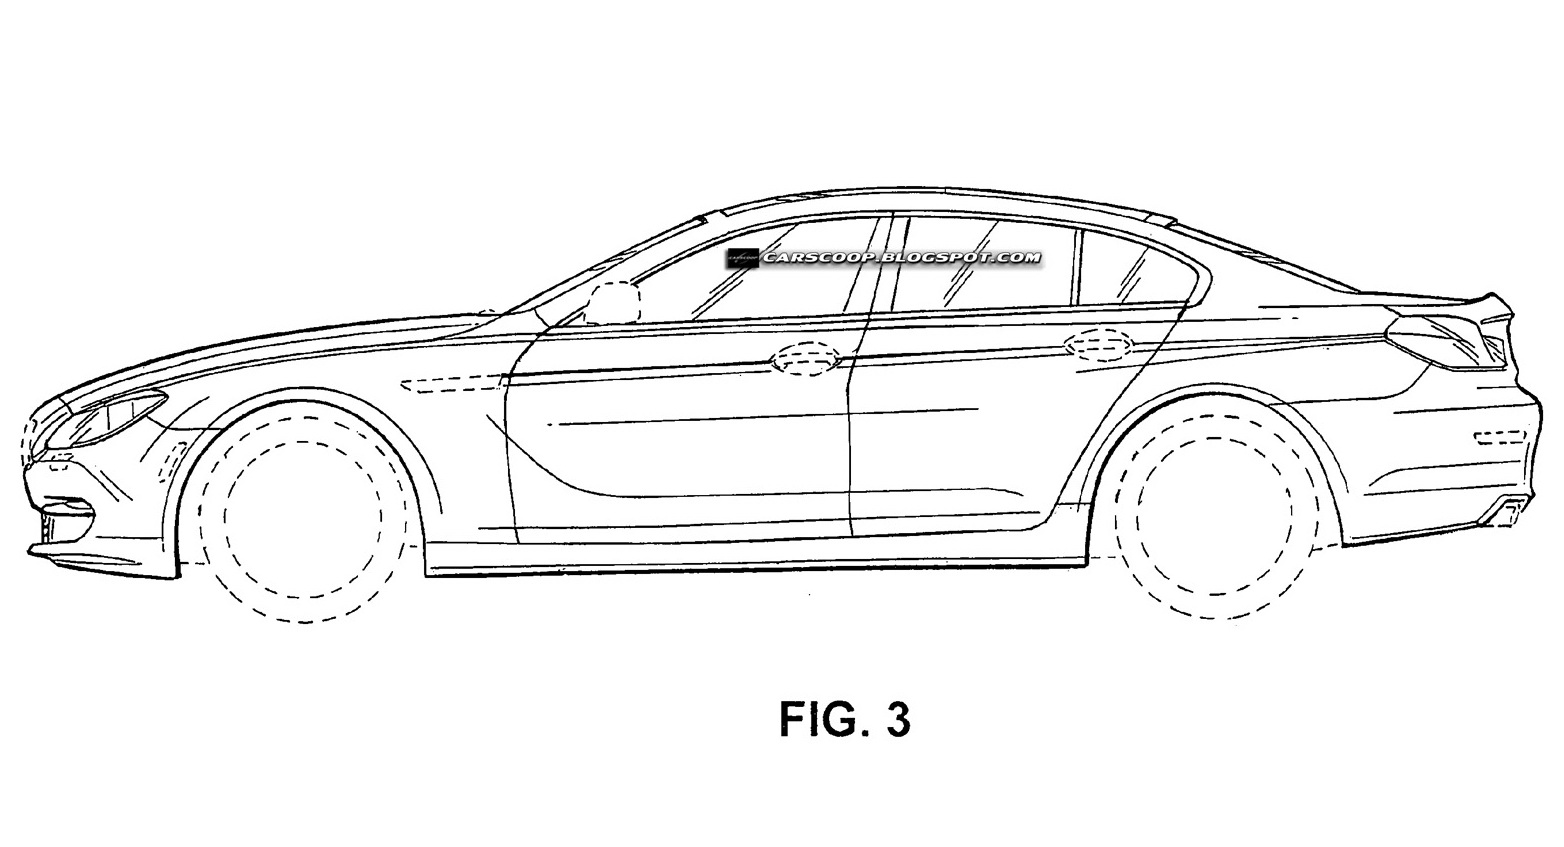 Best Of Automobile: Official Patent Designs of BMW's New Four-Door ...